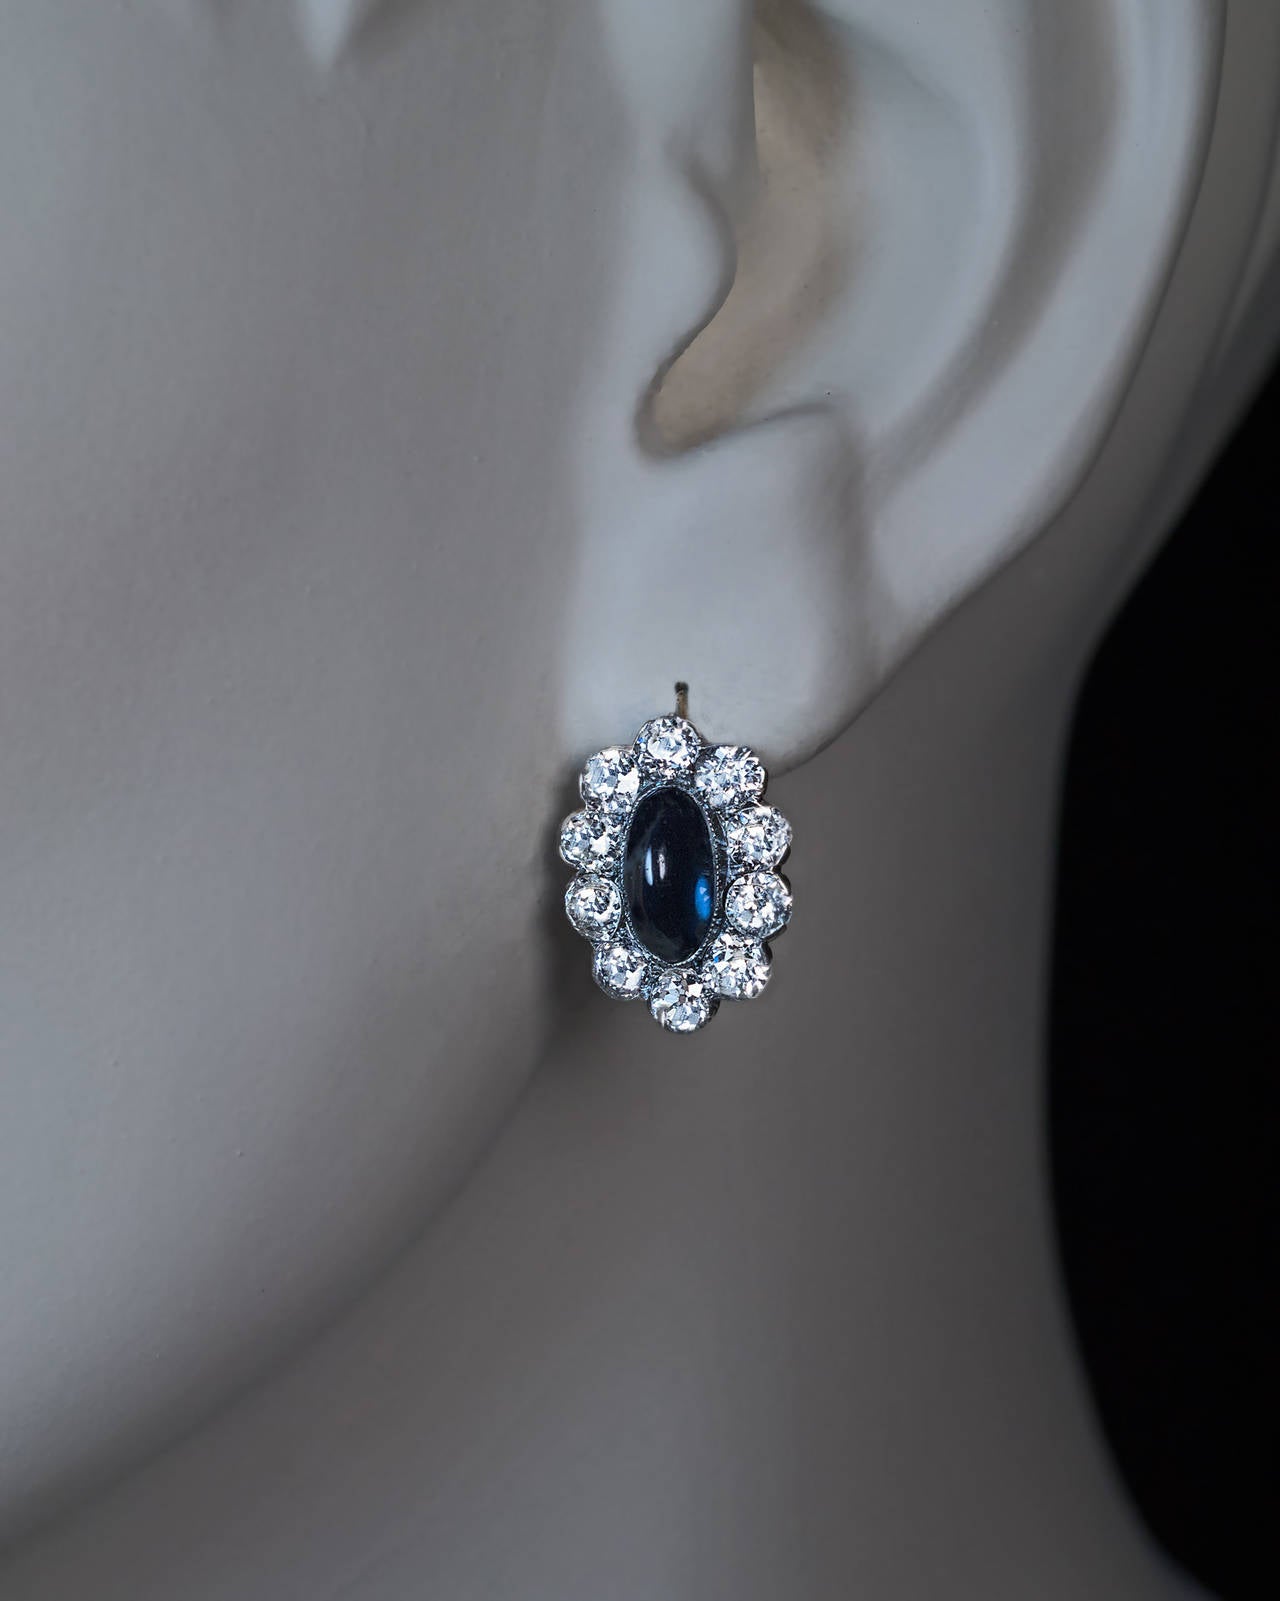 Russian, made in Kiev between 1908 and 1917

Silver and 14K gold, centered with cabochon cut sapphires surrounded by sparkling bright white old European cut diamonds

Marked with 56 zolotnik gold standard and maker's initials